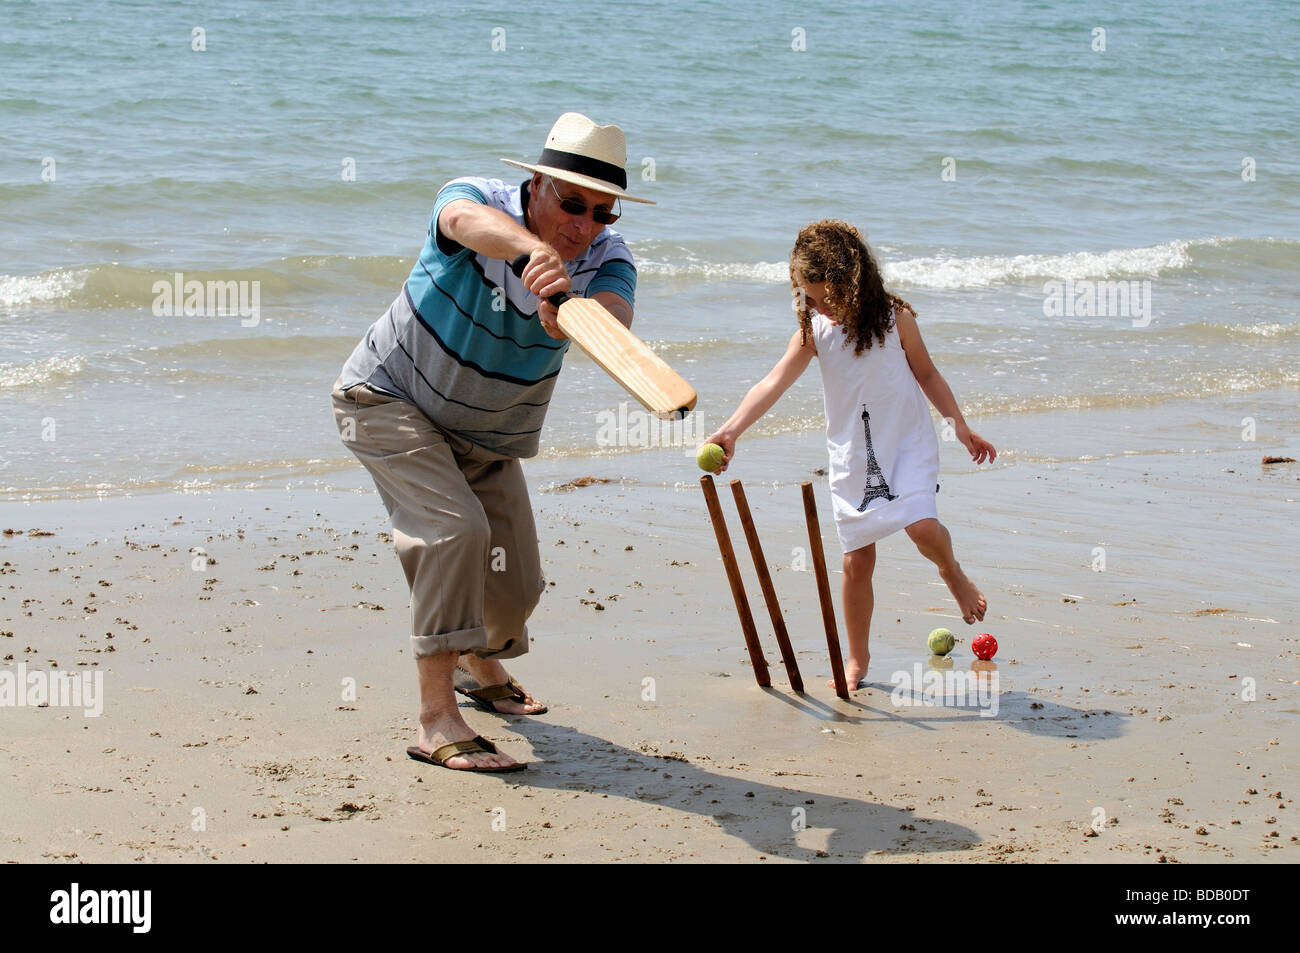 Grandparent playing a game of cricket on the beach with grandchild Grandaughter stumps her grandad Stock Photo